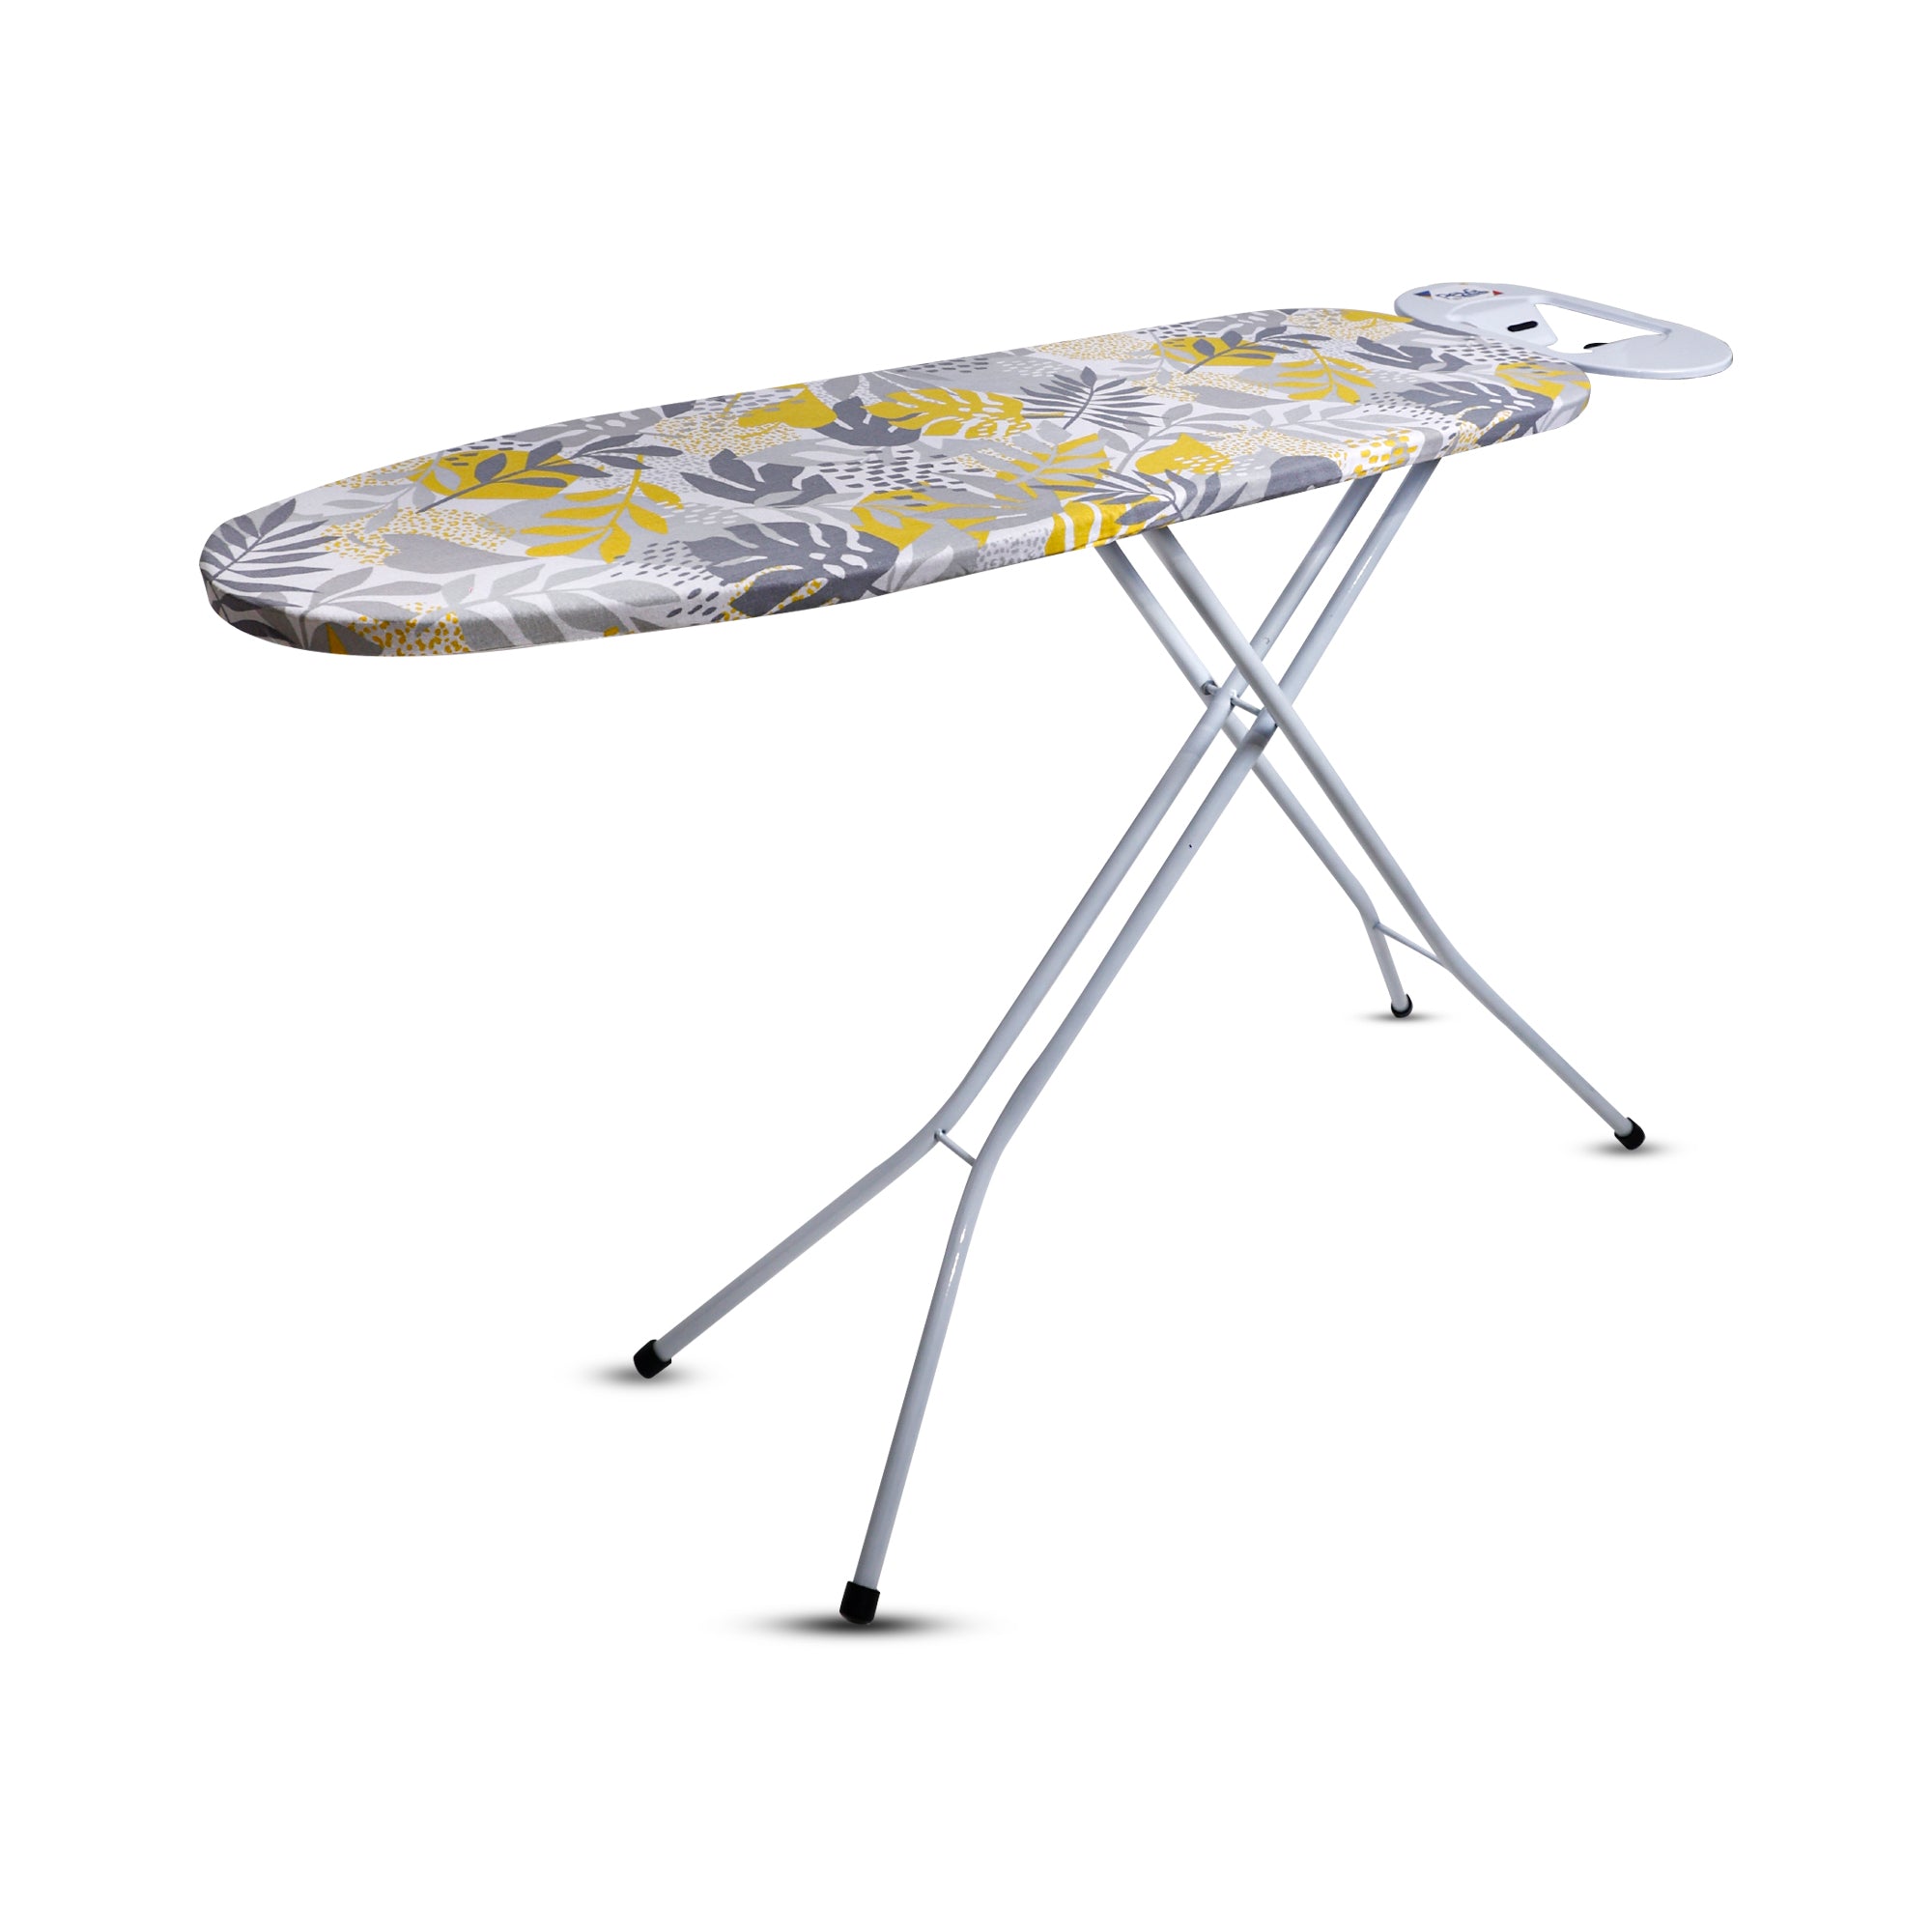 Seville Ironing Board | H-Leg Mild Steel Ironing Board with Silicone Iron Rest I Floral